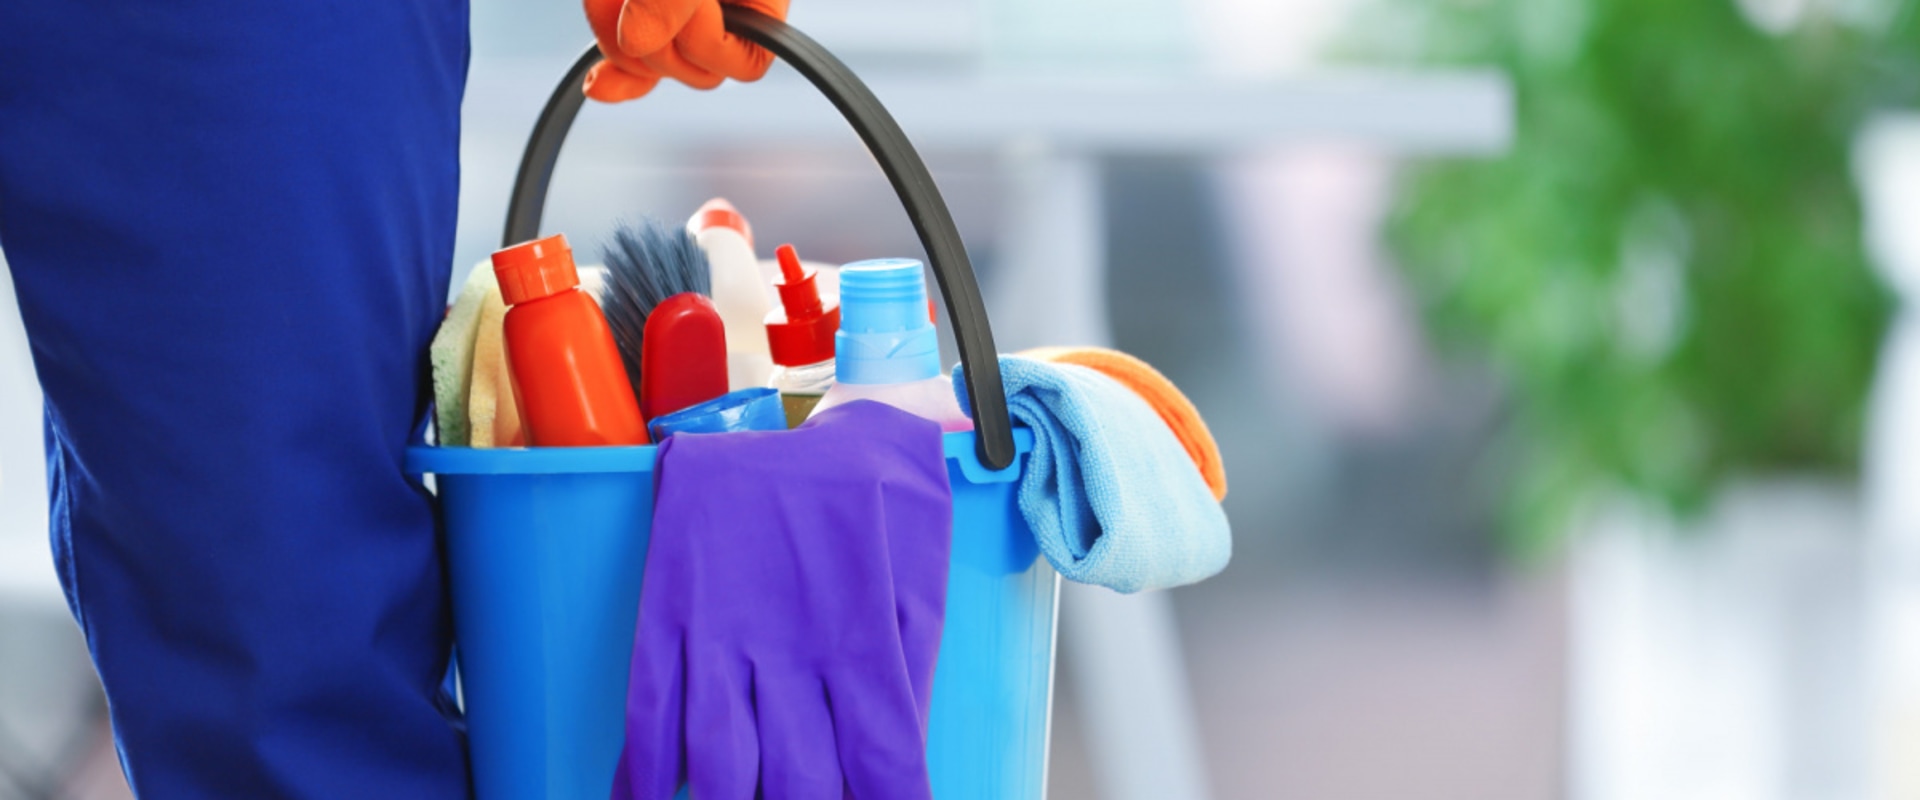 15 Reasons to Hire Professional Commercial Cleaning Services